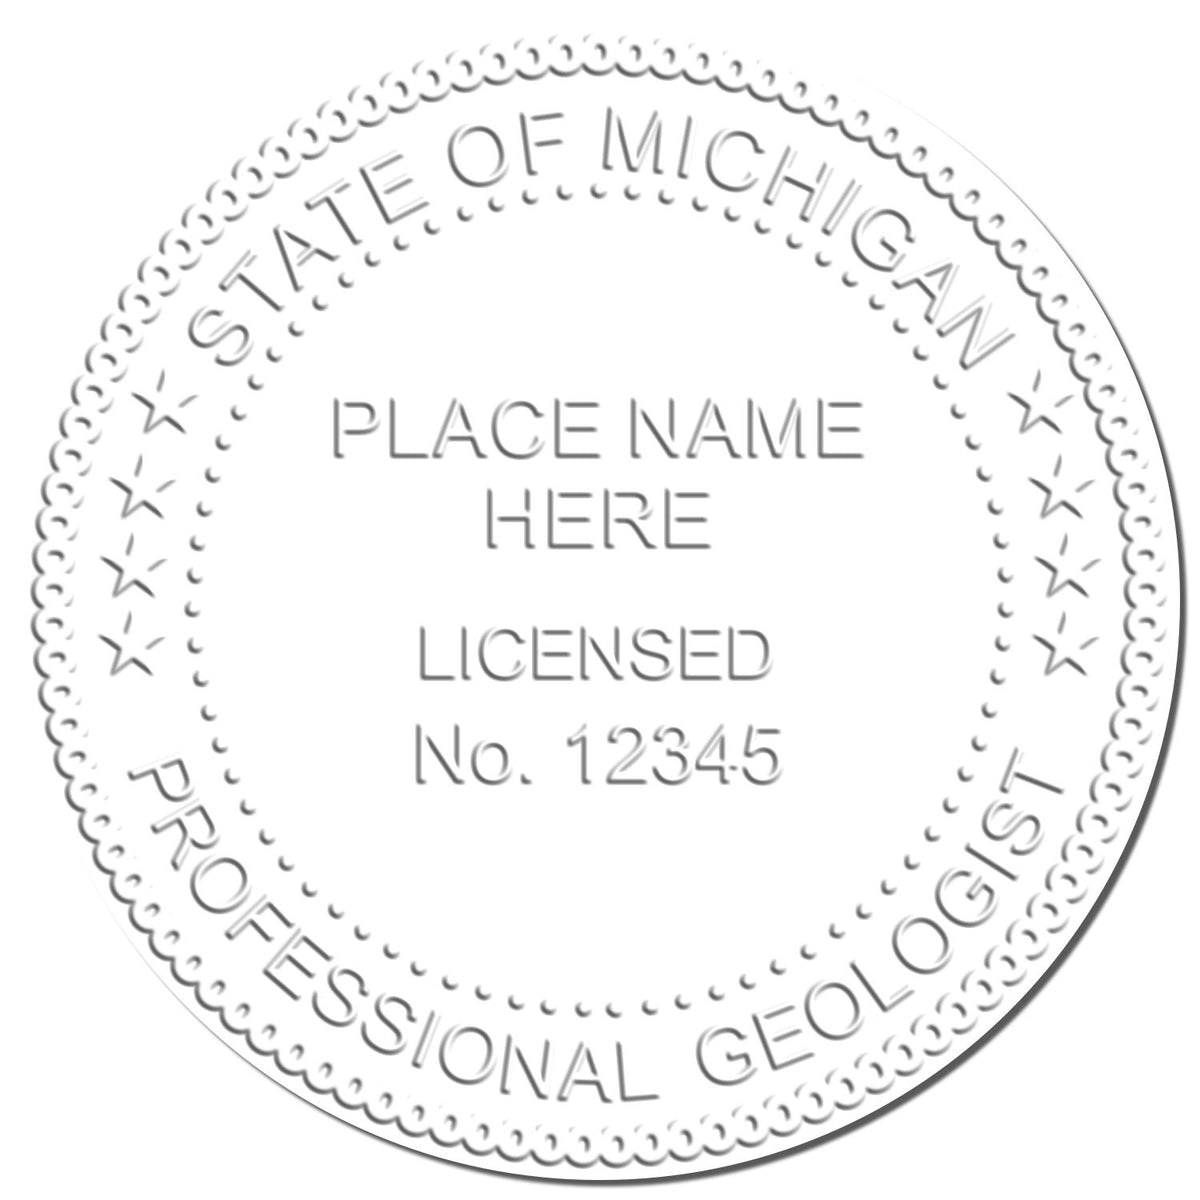 This paper is stamped with a sample imprint of the Handheld Michigan Professional Geologist Embosser, signifying its quality and reliability.